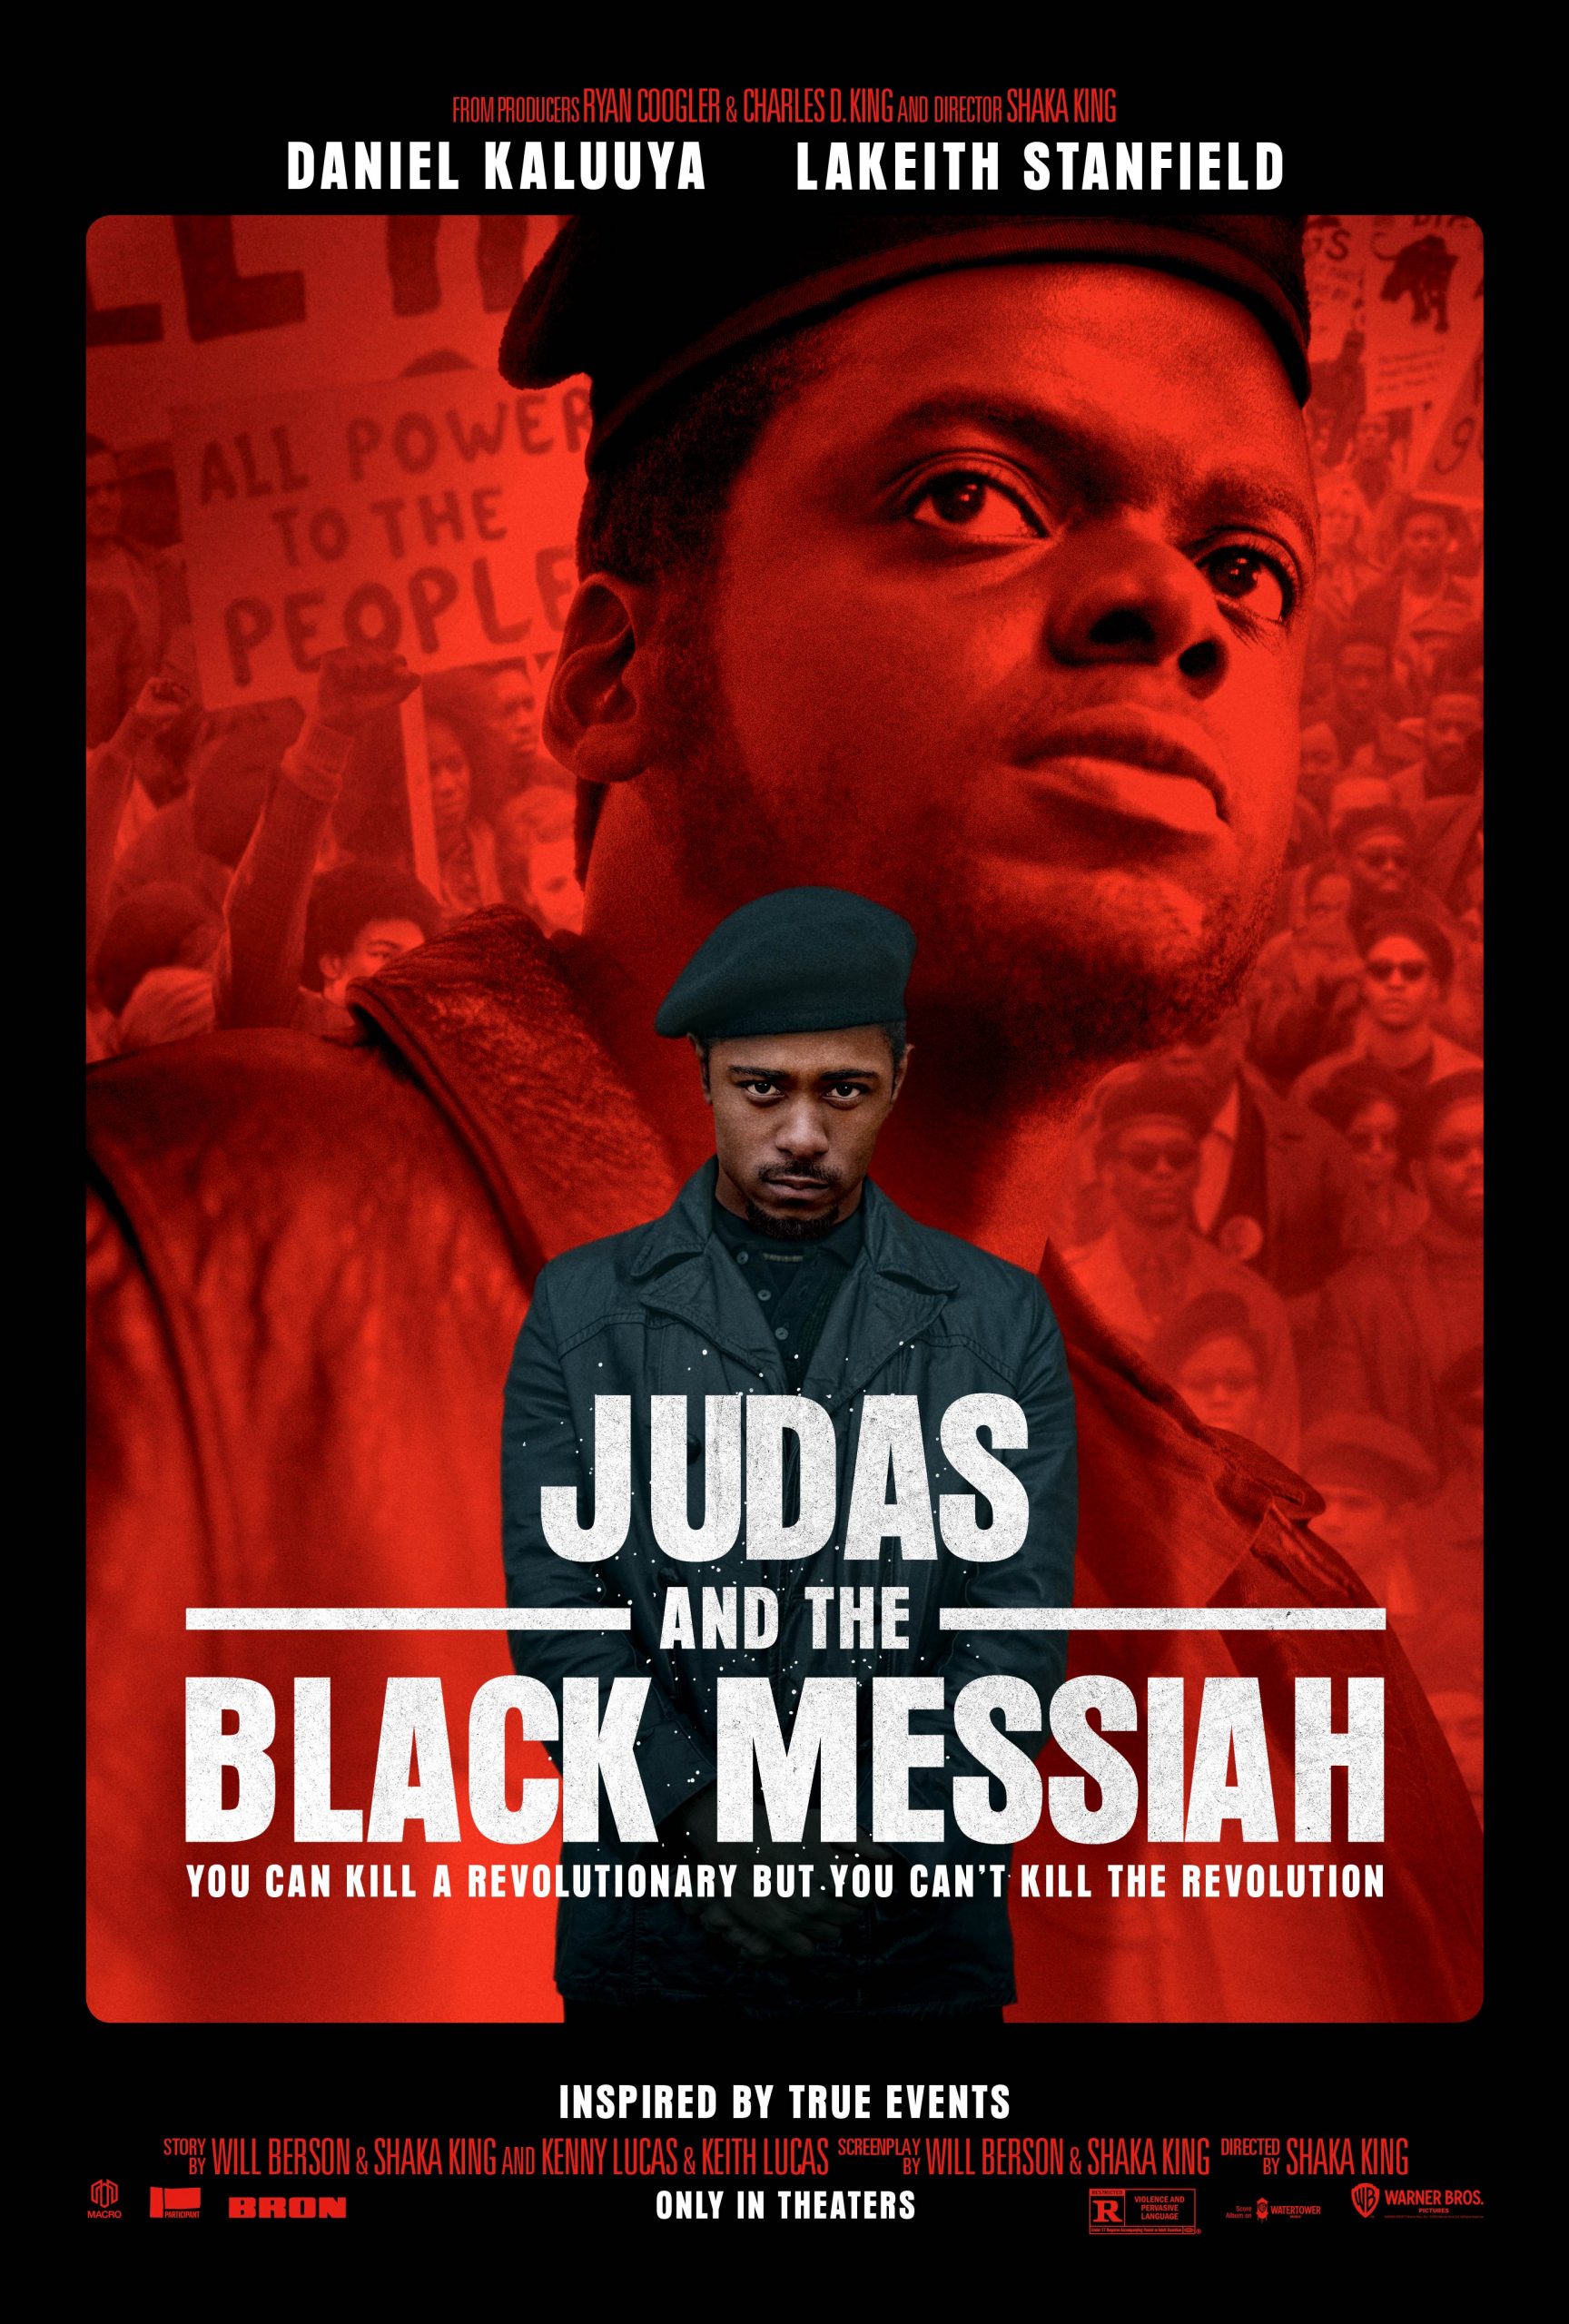 Judas and the Black Messiah' is a potent lesson on loyalty and tragedy